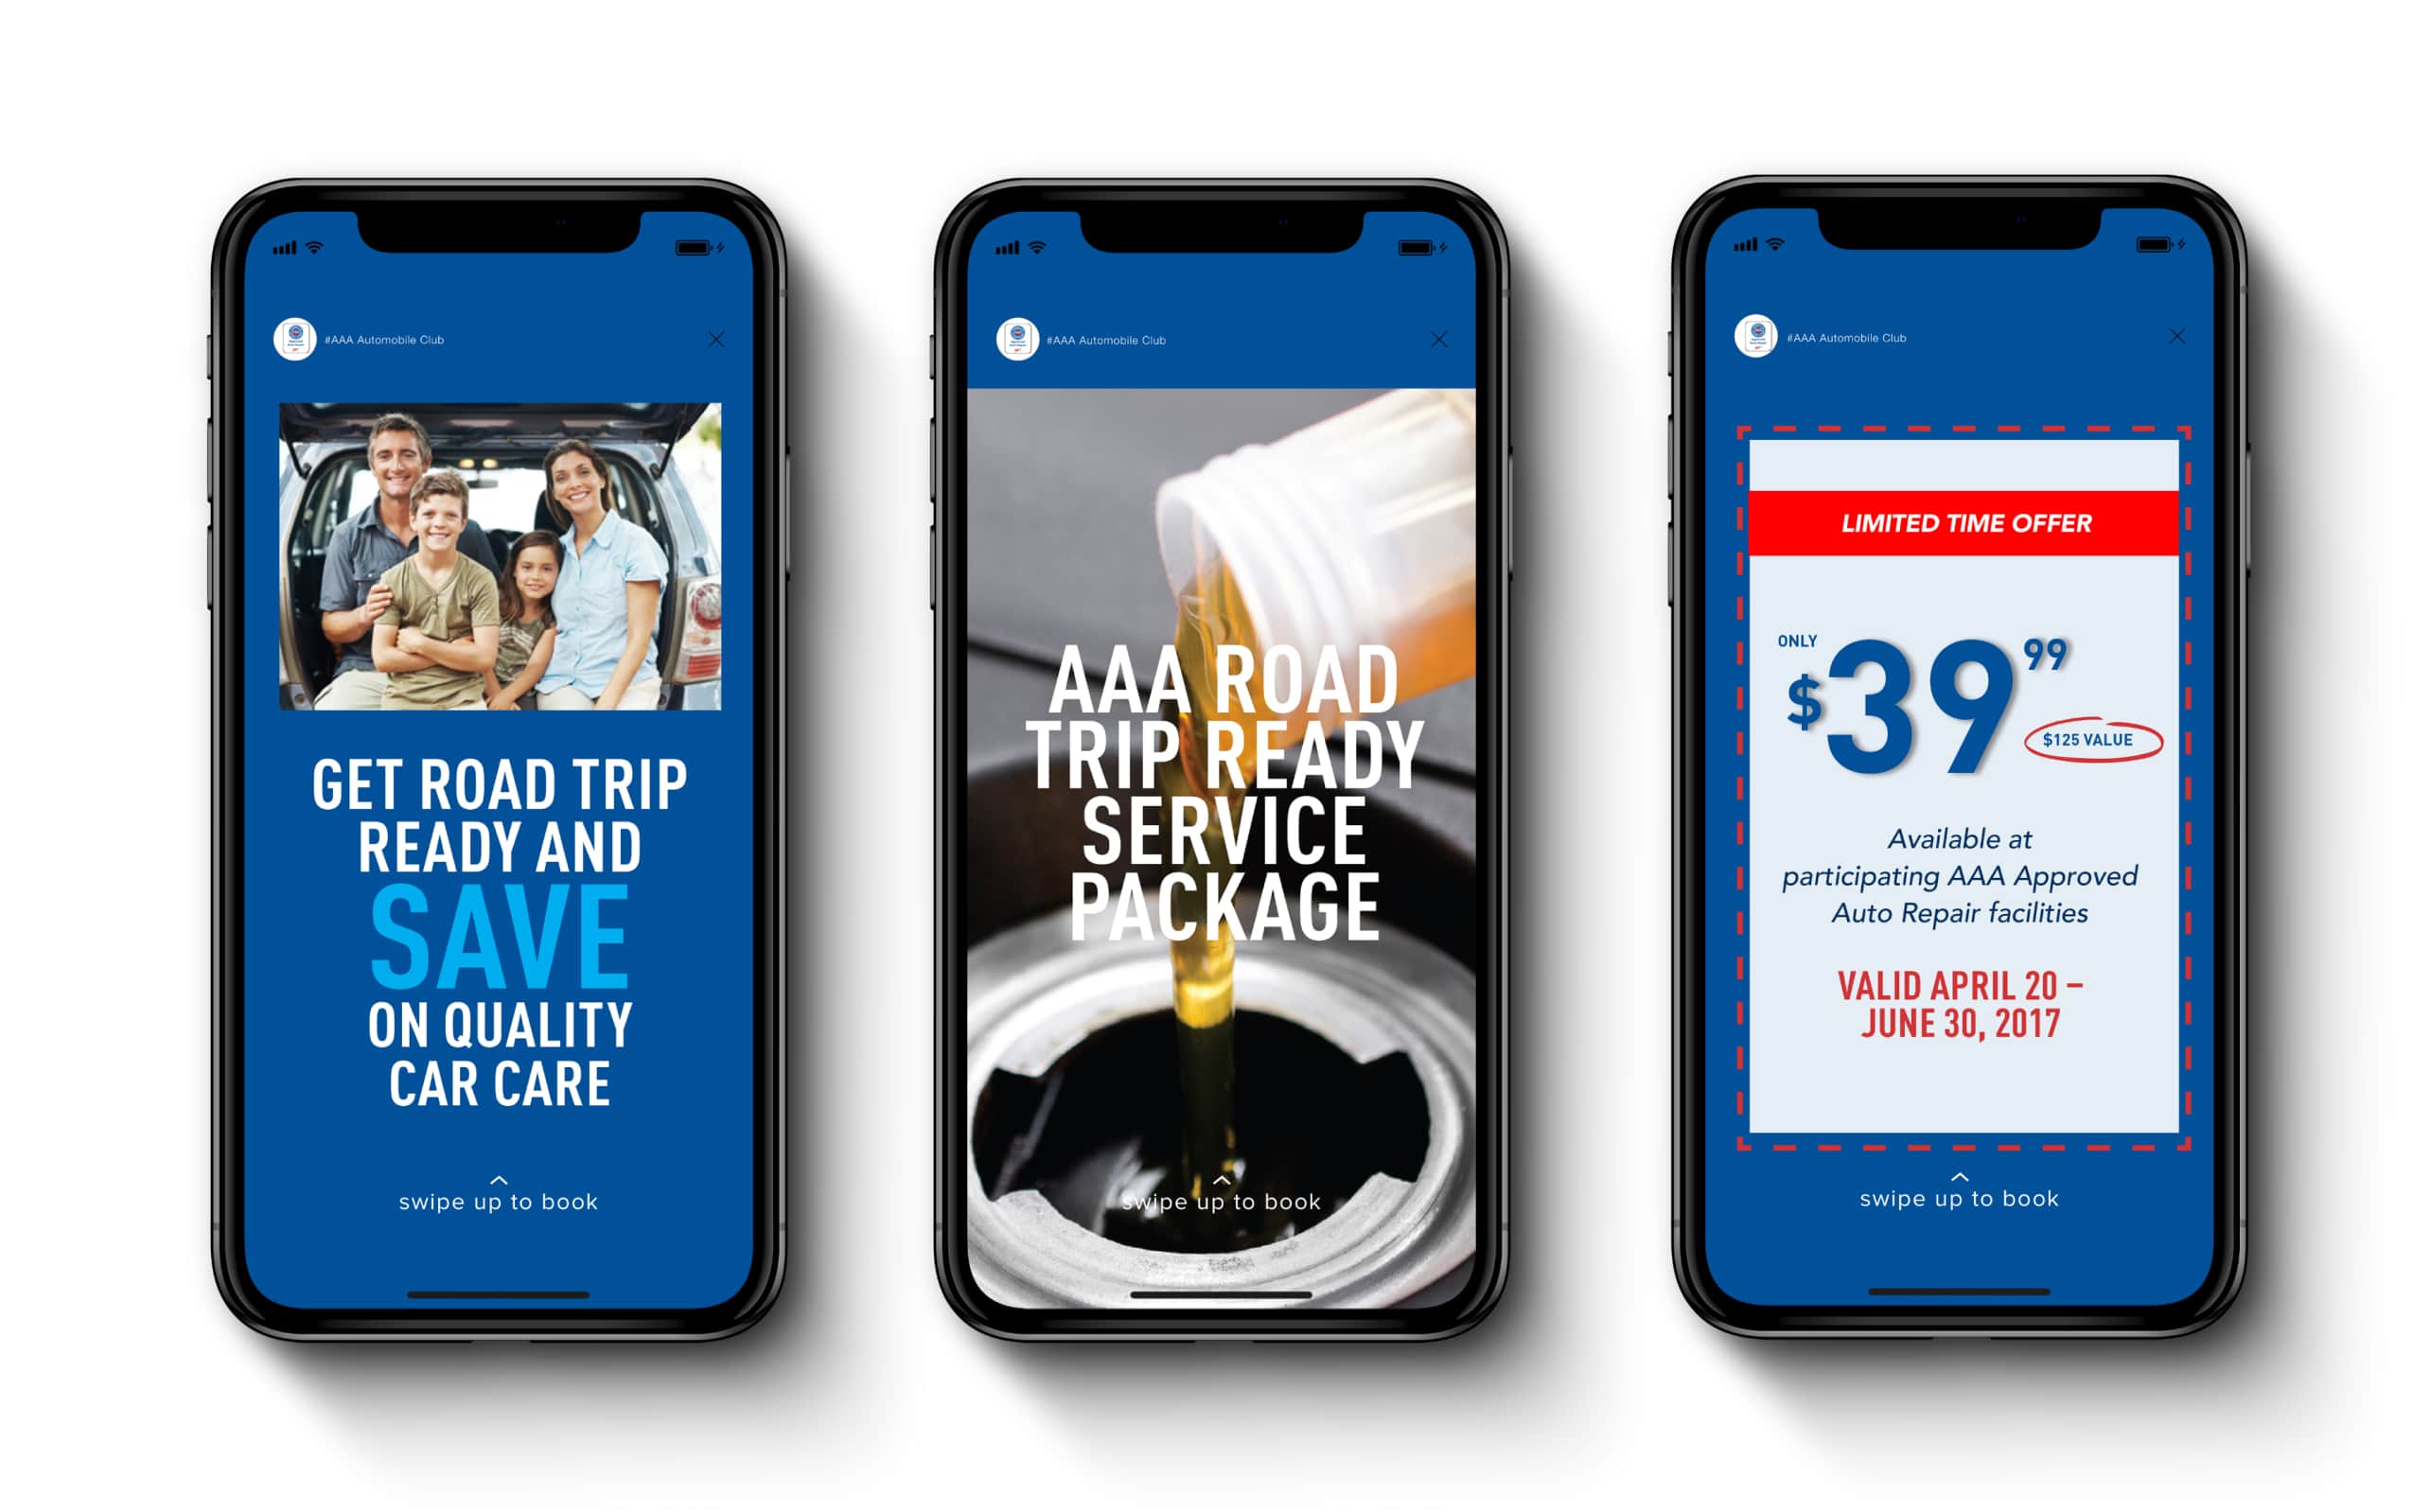 Three smartphones side by side, each displaying a different AAA service advertisement. The first promotes road trip readiness and quality car care, the second offers a 'Road Trip Ready Service Package', and the third displays a limited time offer for a service priced.